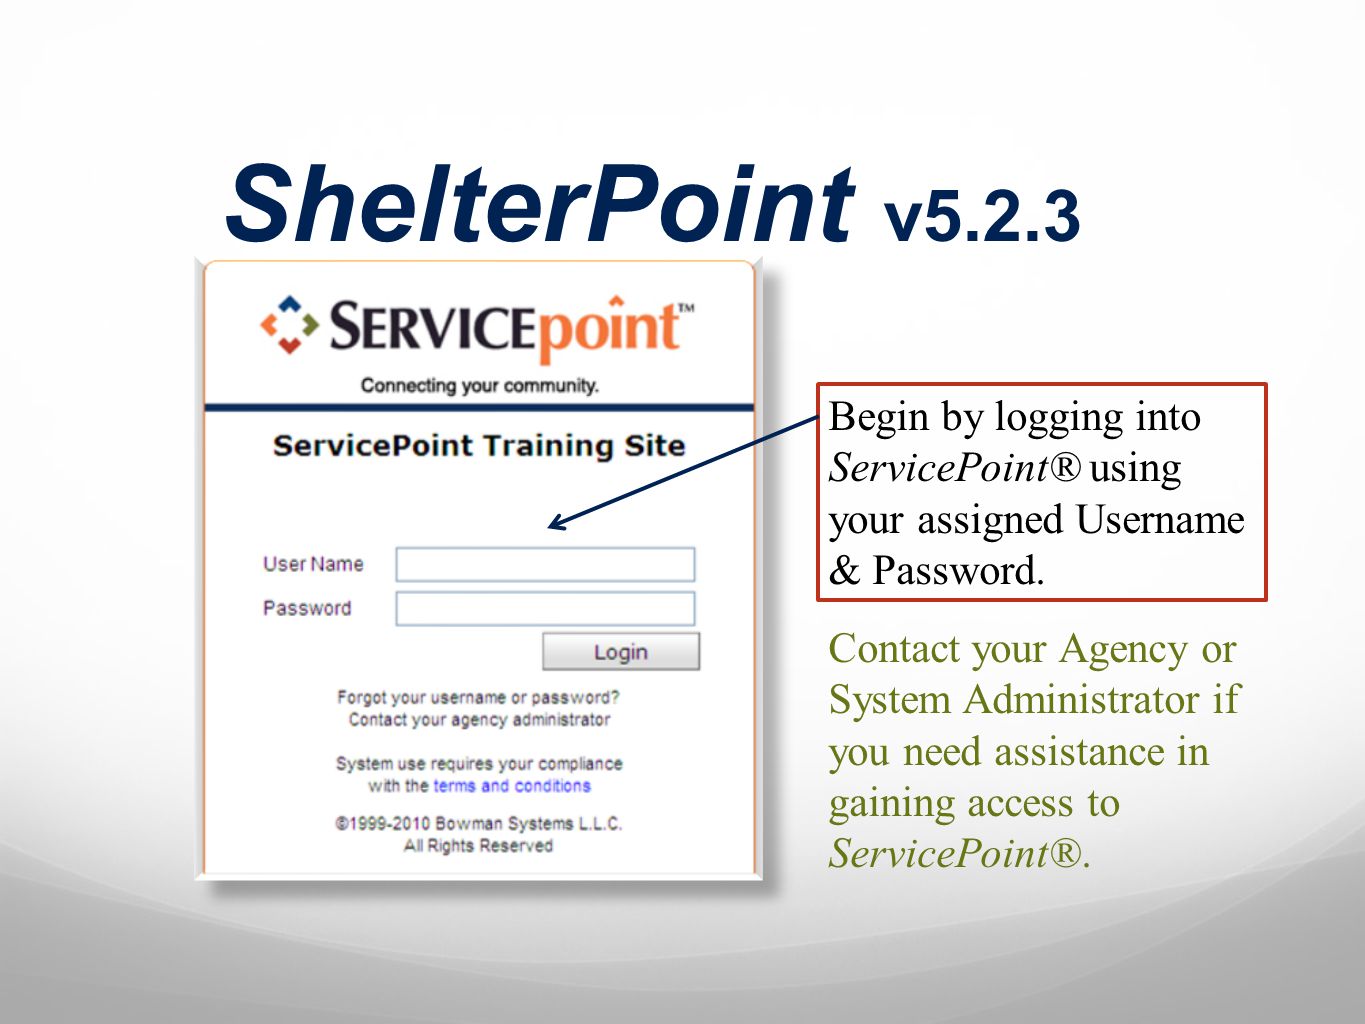 ShelterPoint v5.2.3 Begin by logging into ServicePoint® using your assigned Username & Password.